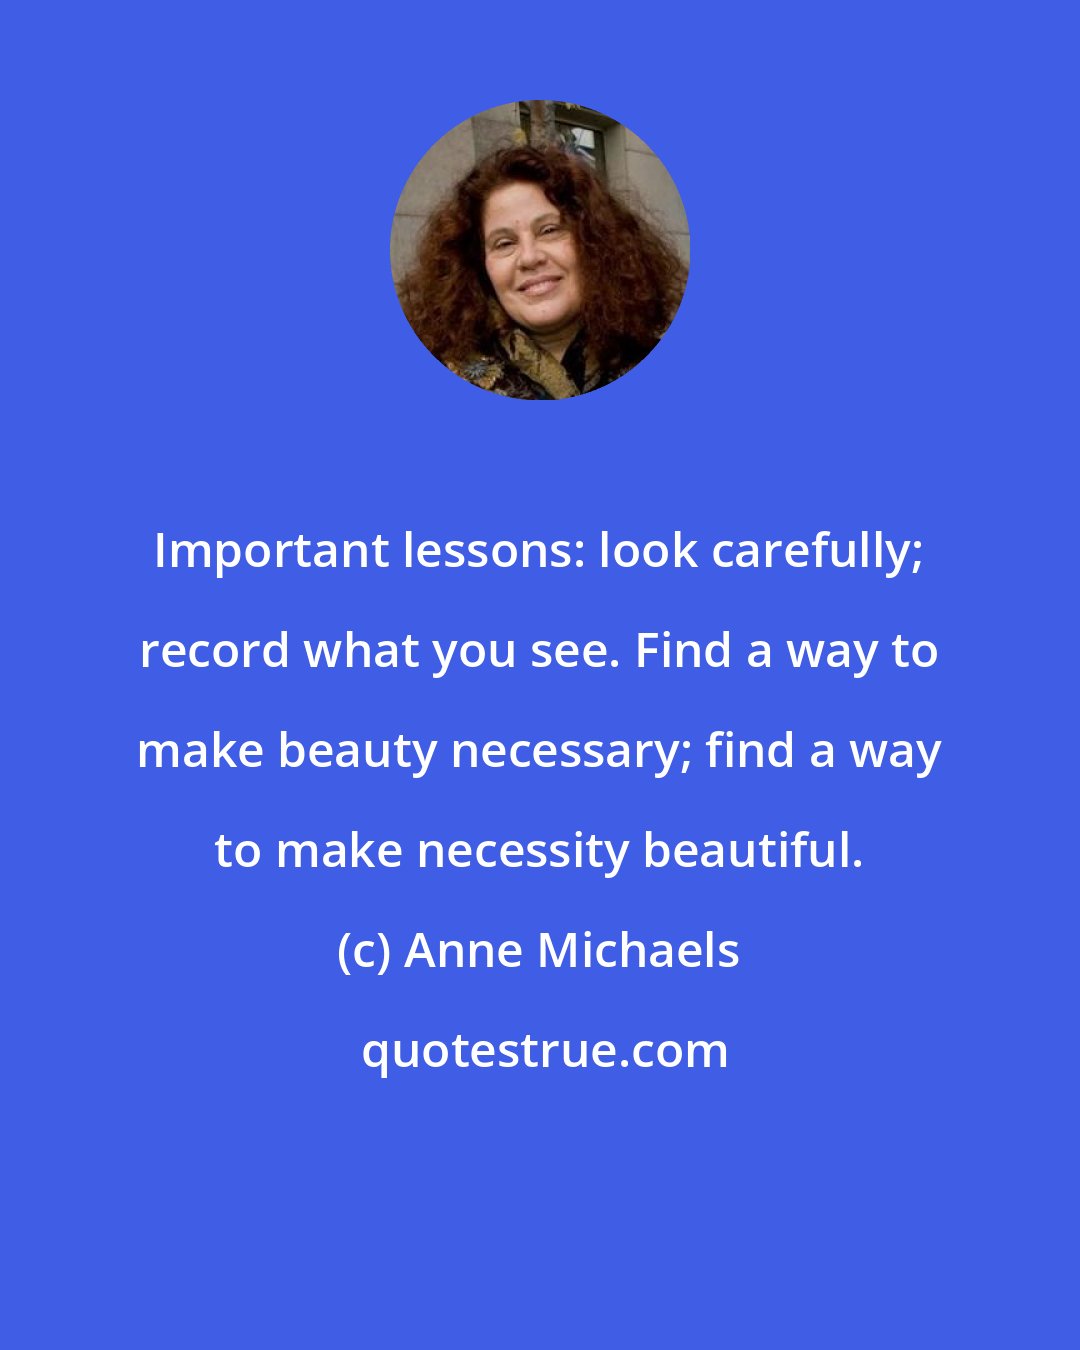 Anne Michaels: Important lessons: look carefully; record what you see. Find a way to make beauty necessary; find a way to make necessity beautiful.